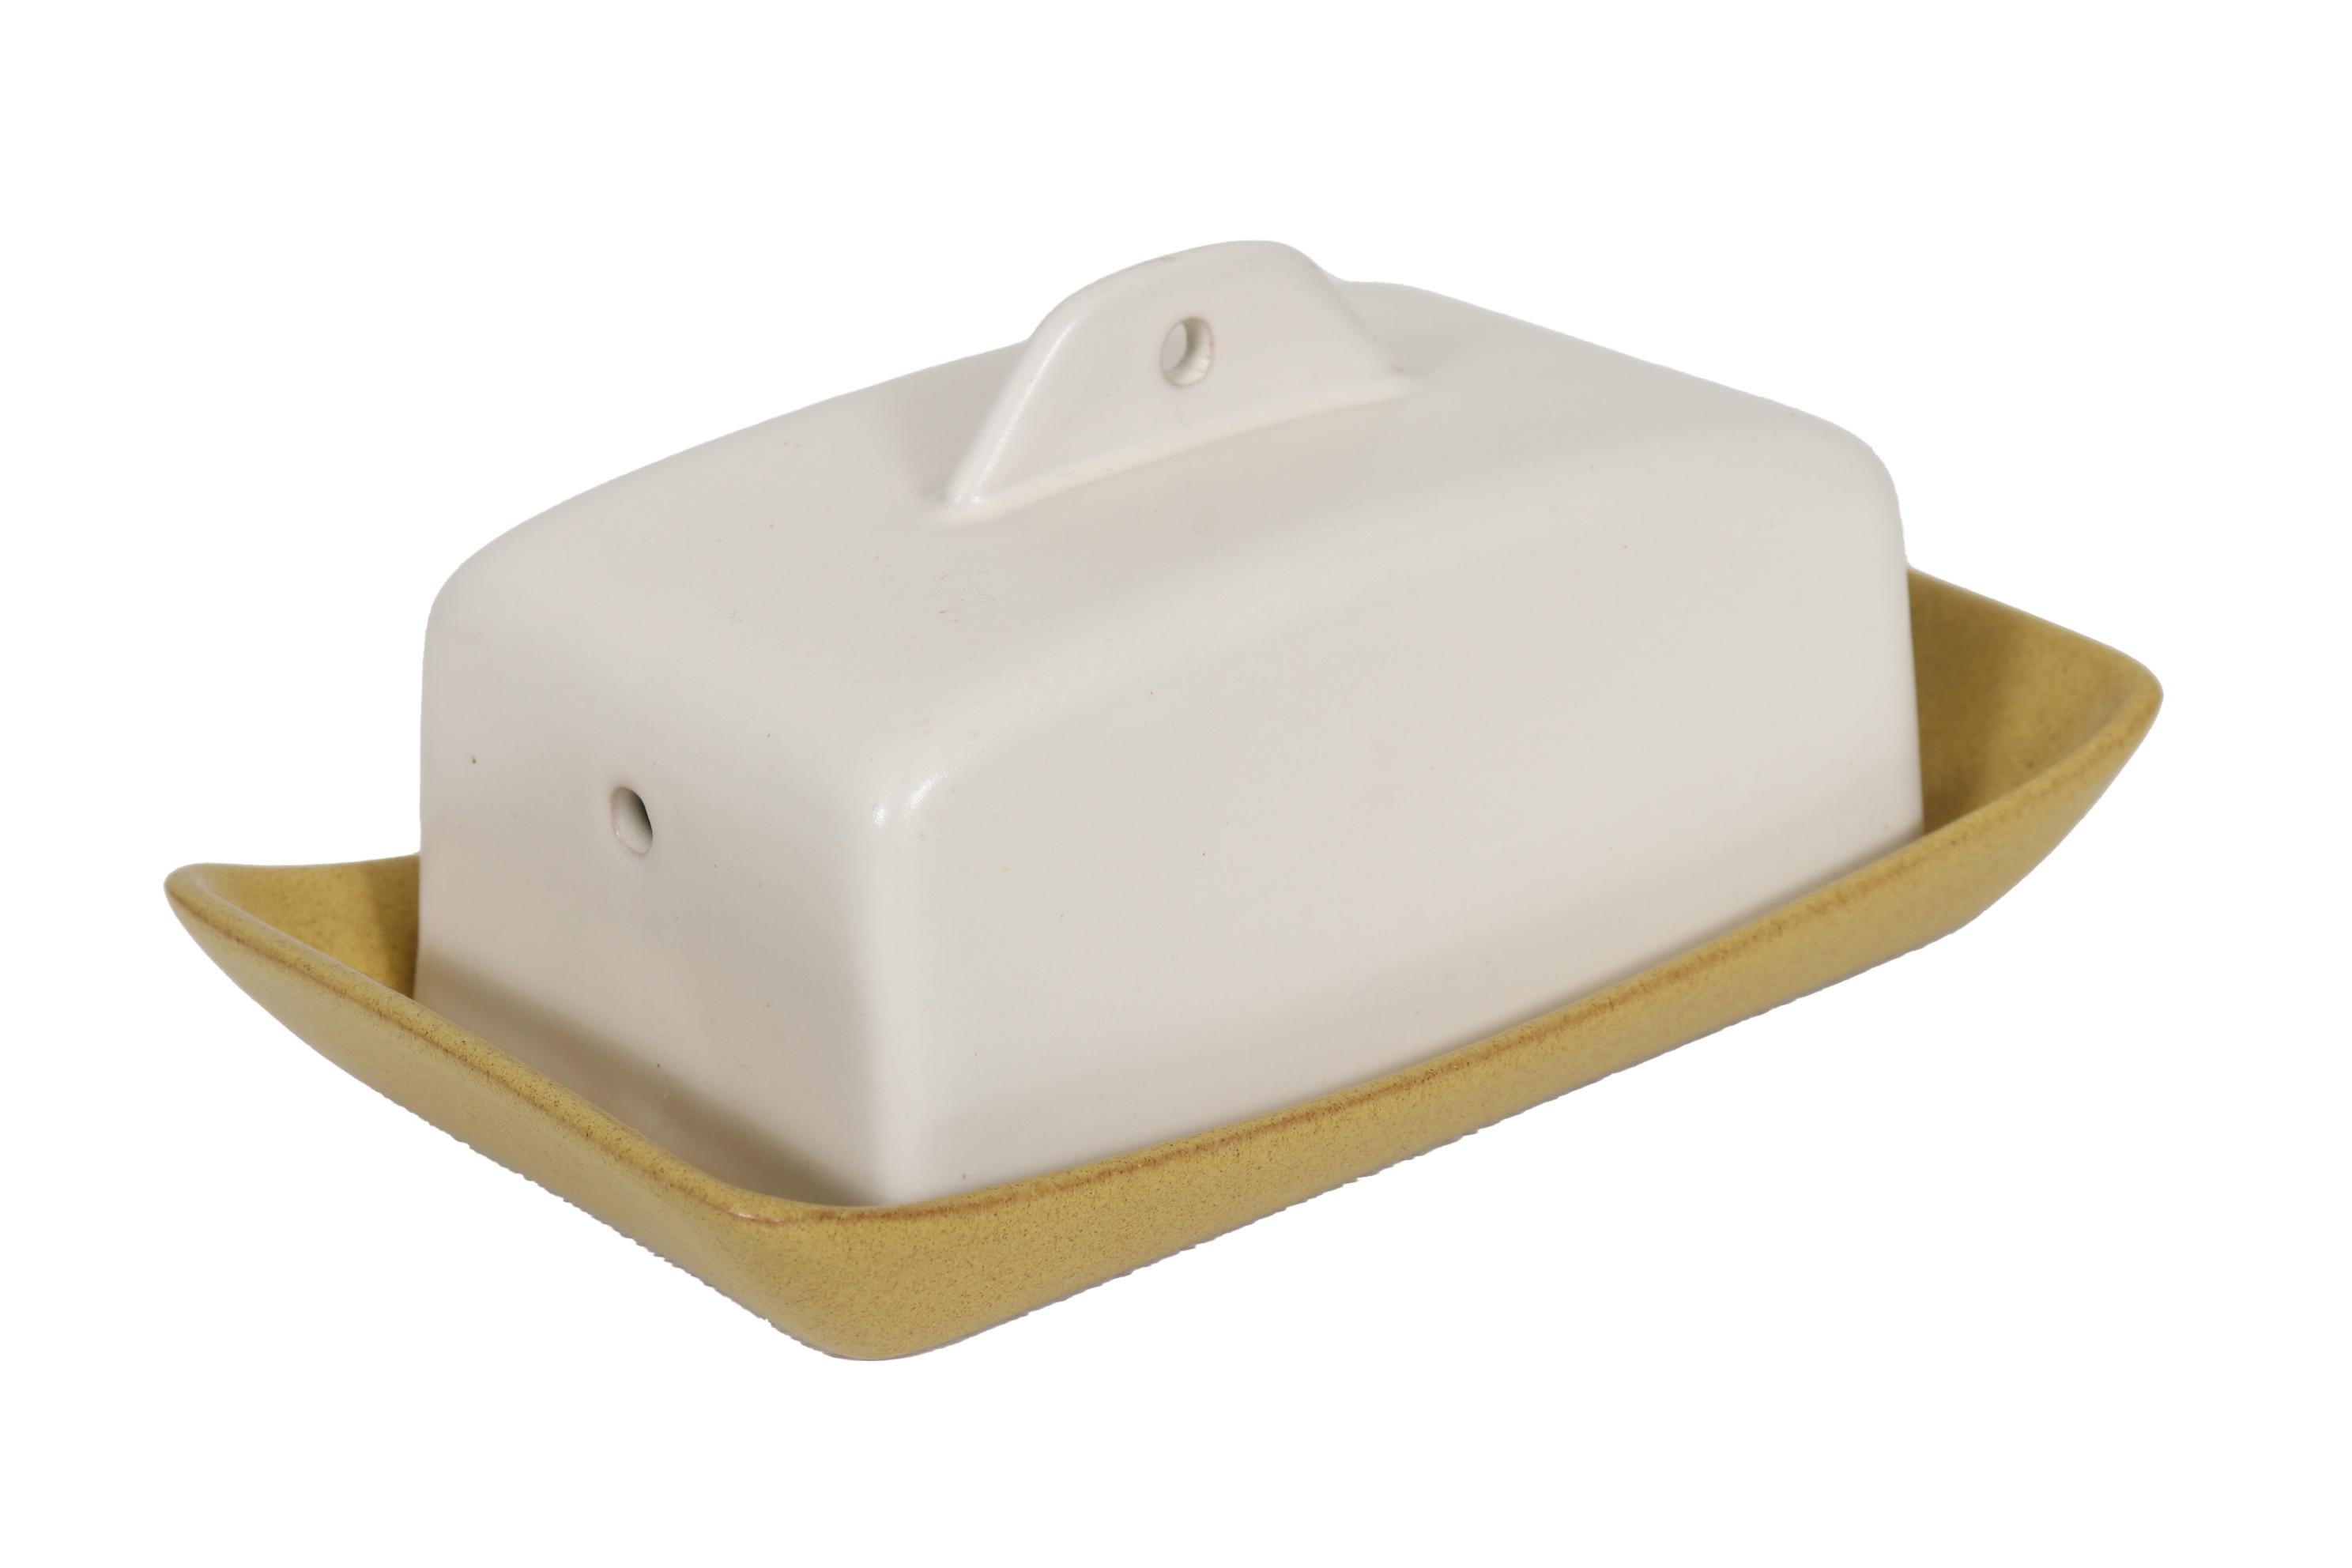 A modern earthenware English butter dish made by Denby, a traditional English pottery company in the village of Denby, Derbyshire. A traditional rectangular shape is modernized with sweeping curves and mustard and eggshell white hues. Marked Denby